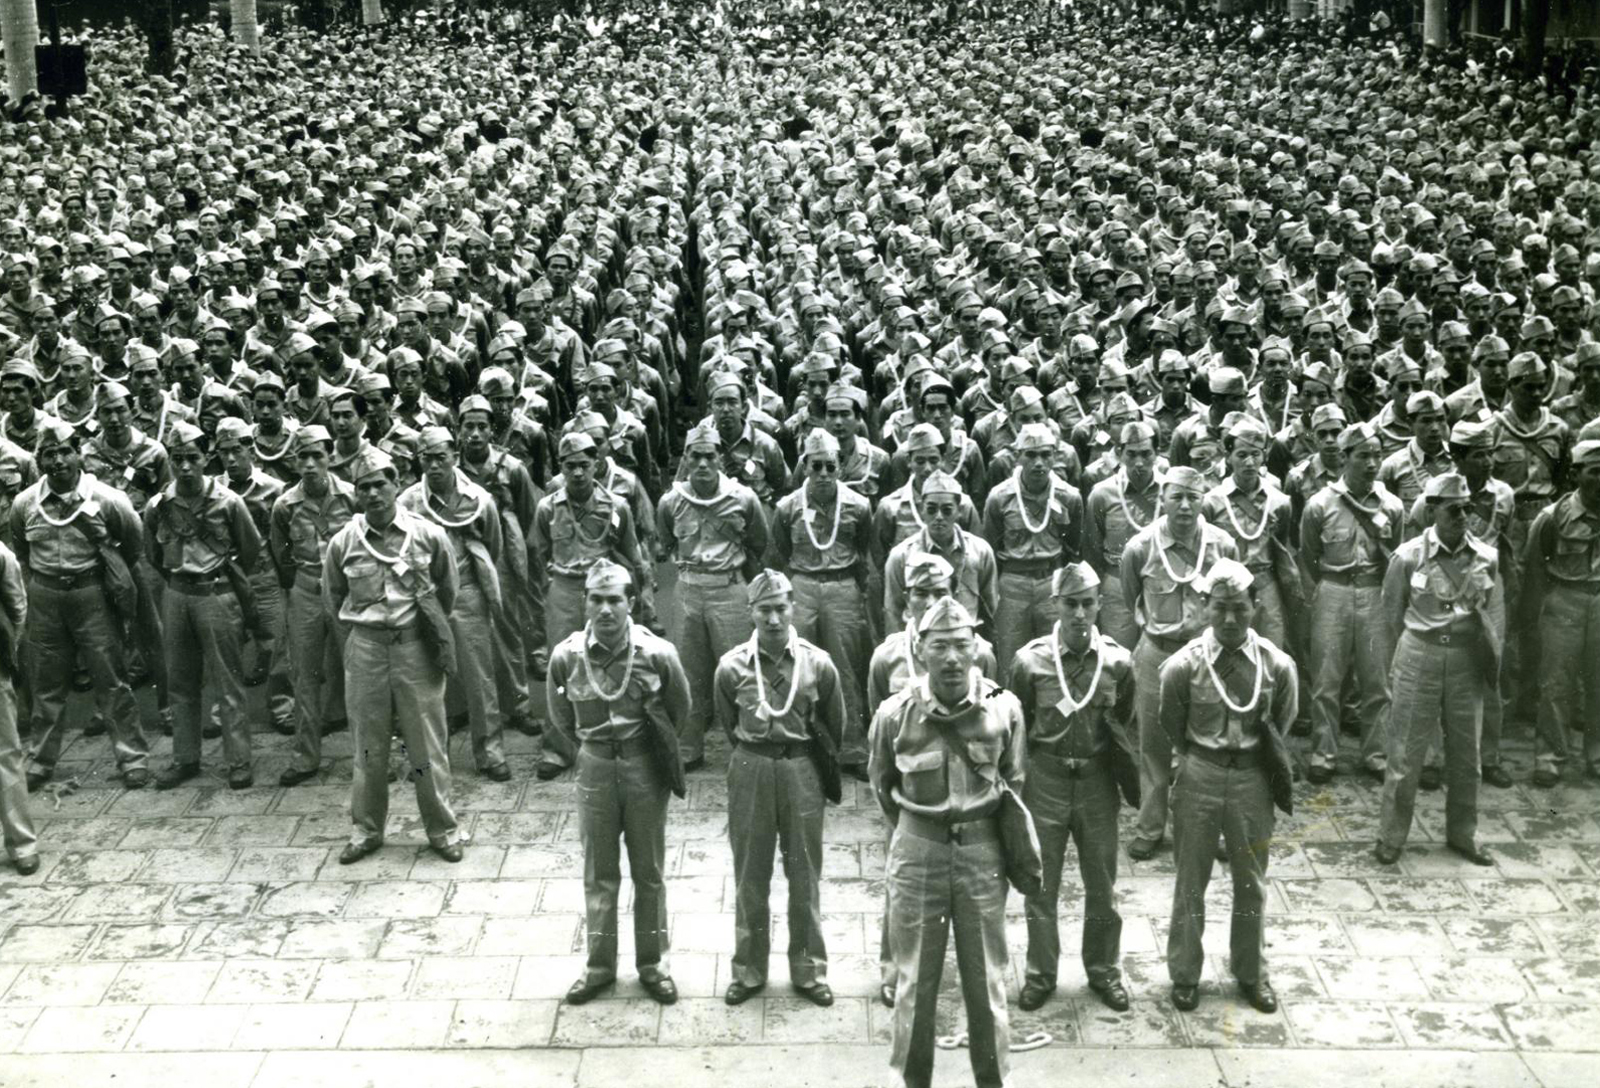 442nd in front of the Iolani Palace 1943